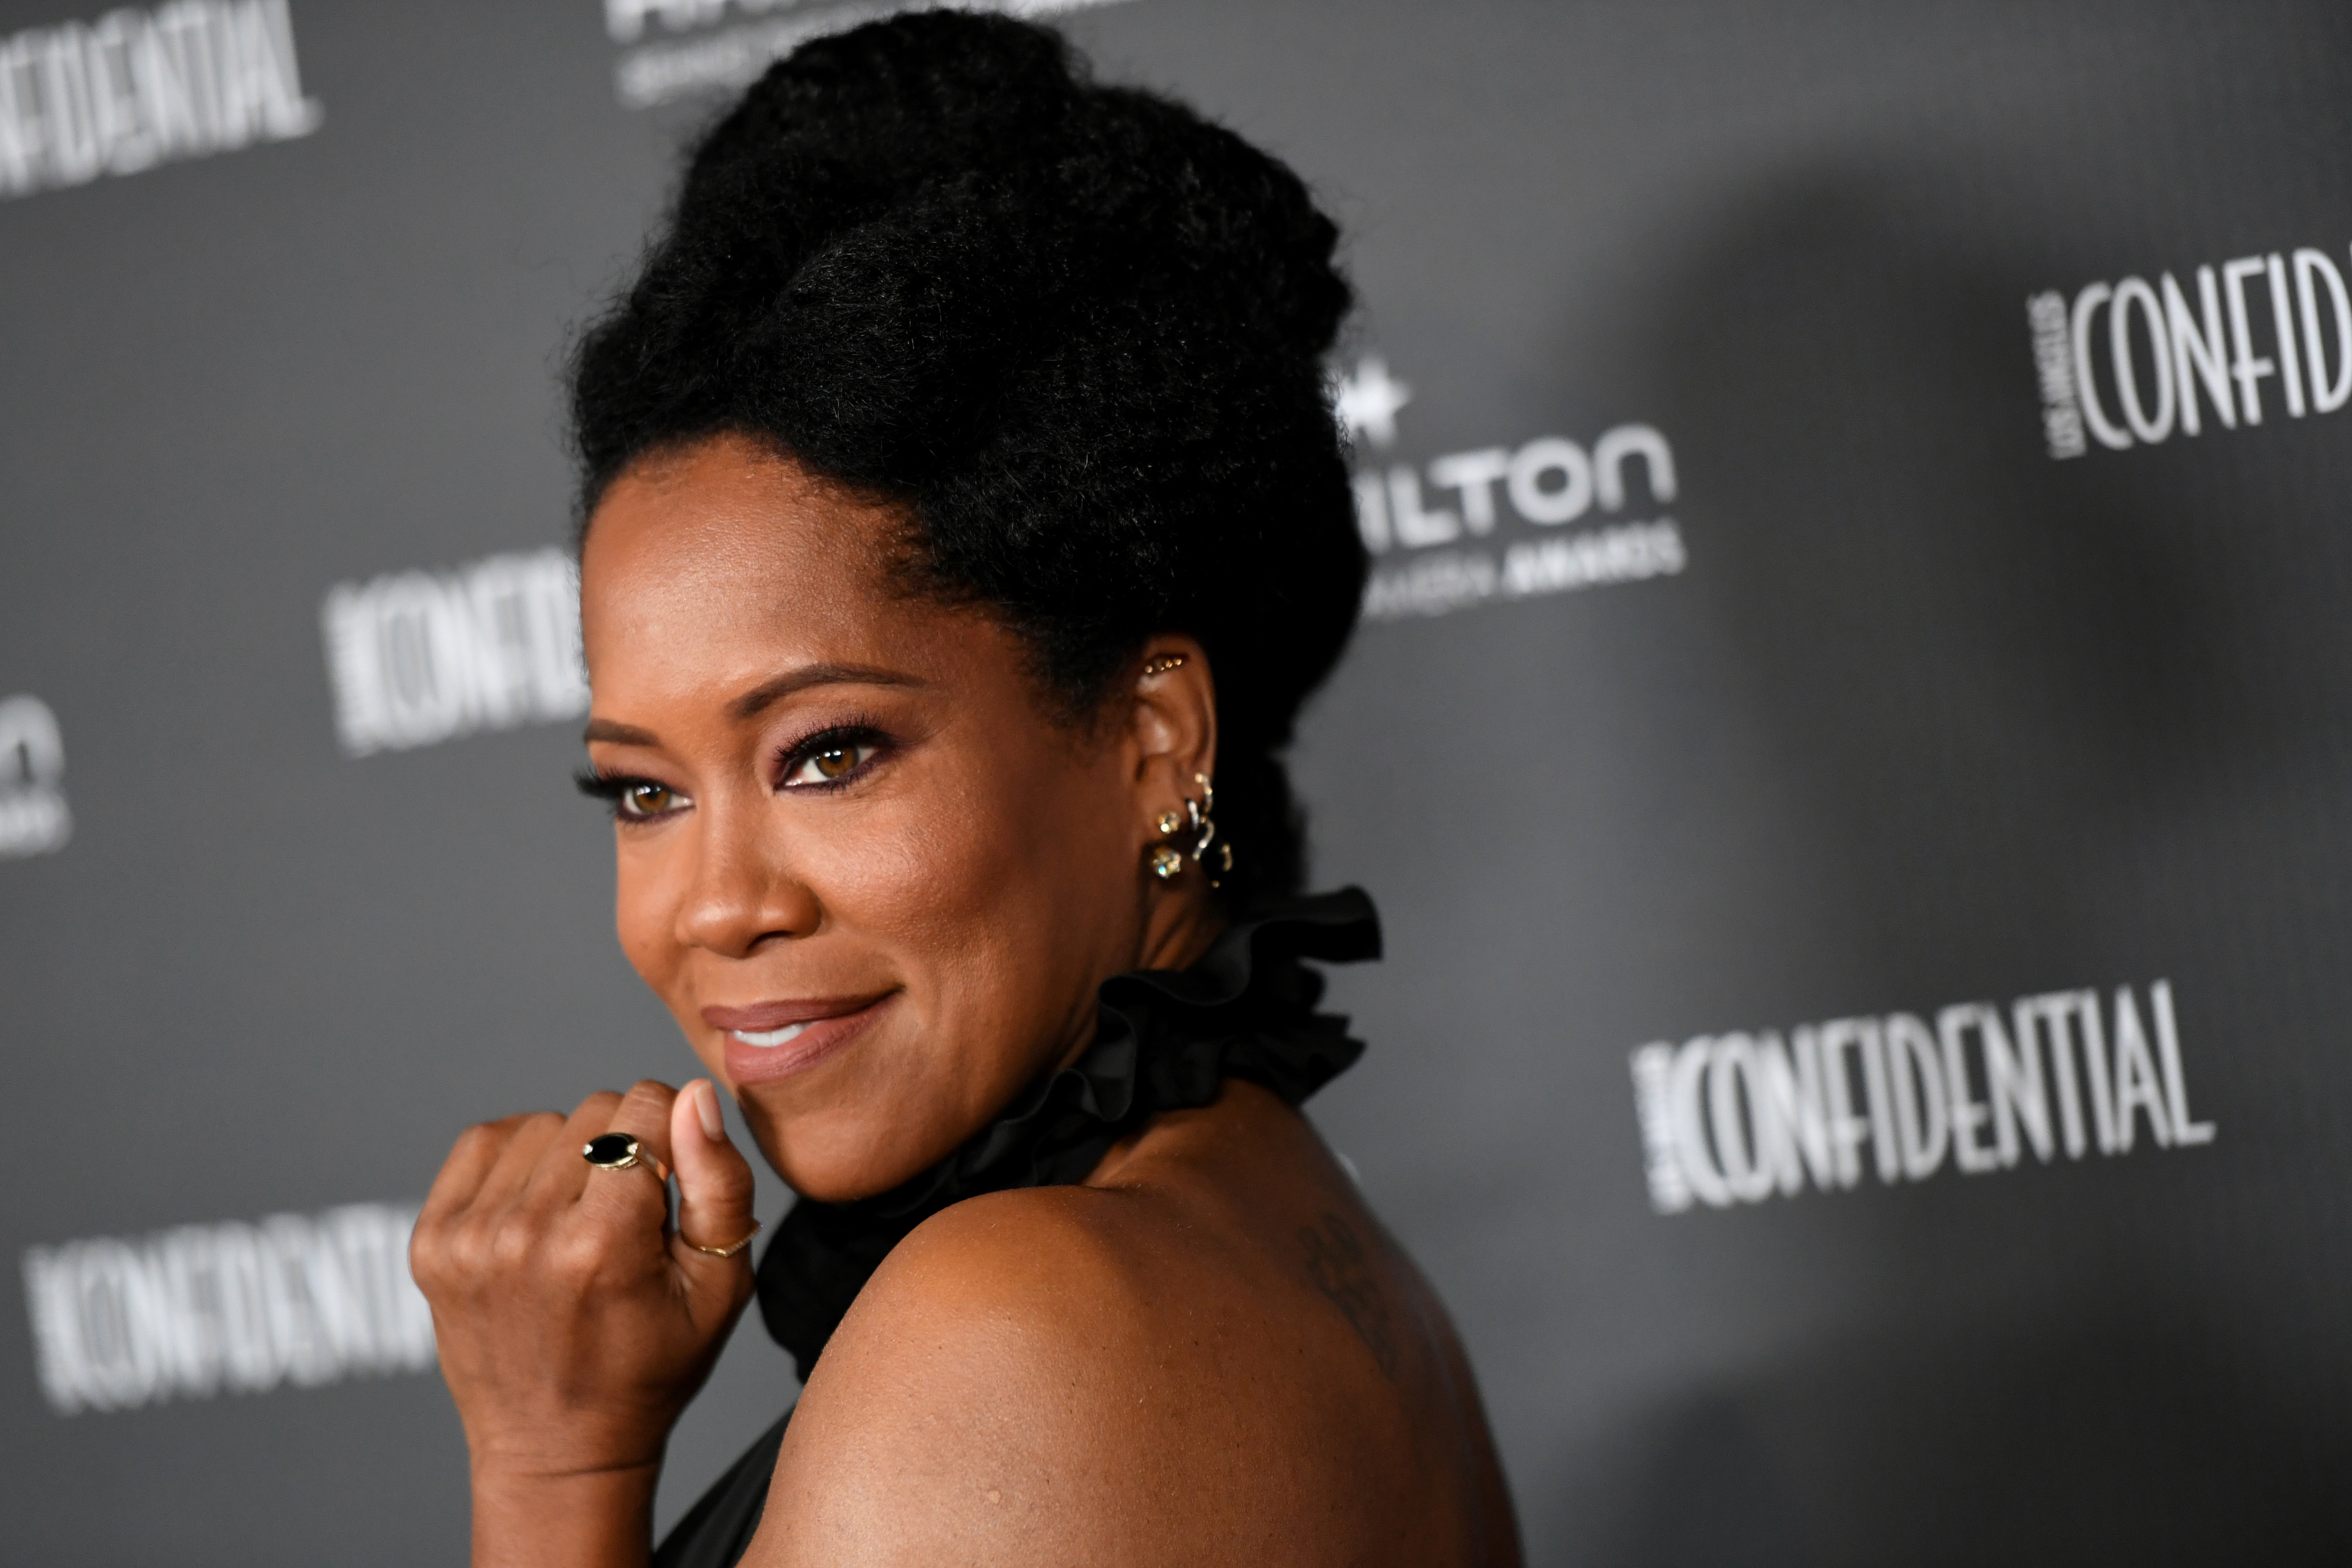 A close-up of Regina King posing for photographers on the red carpet at a media event